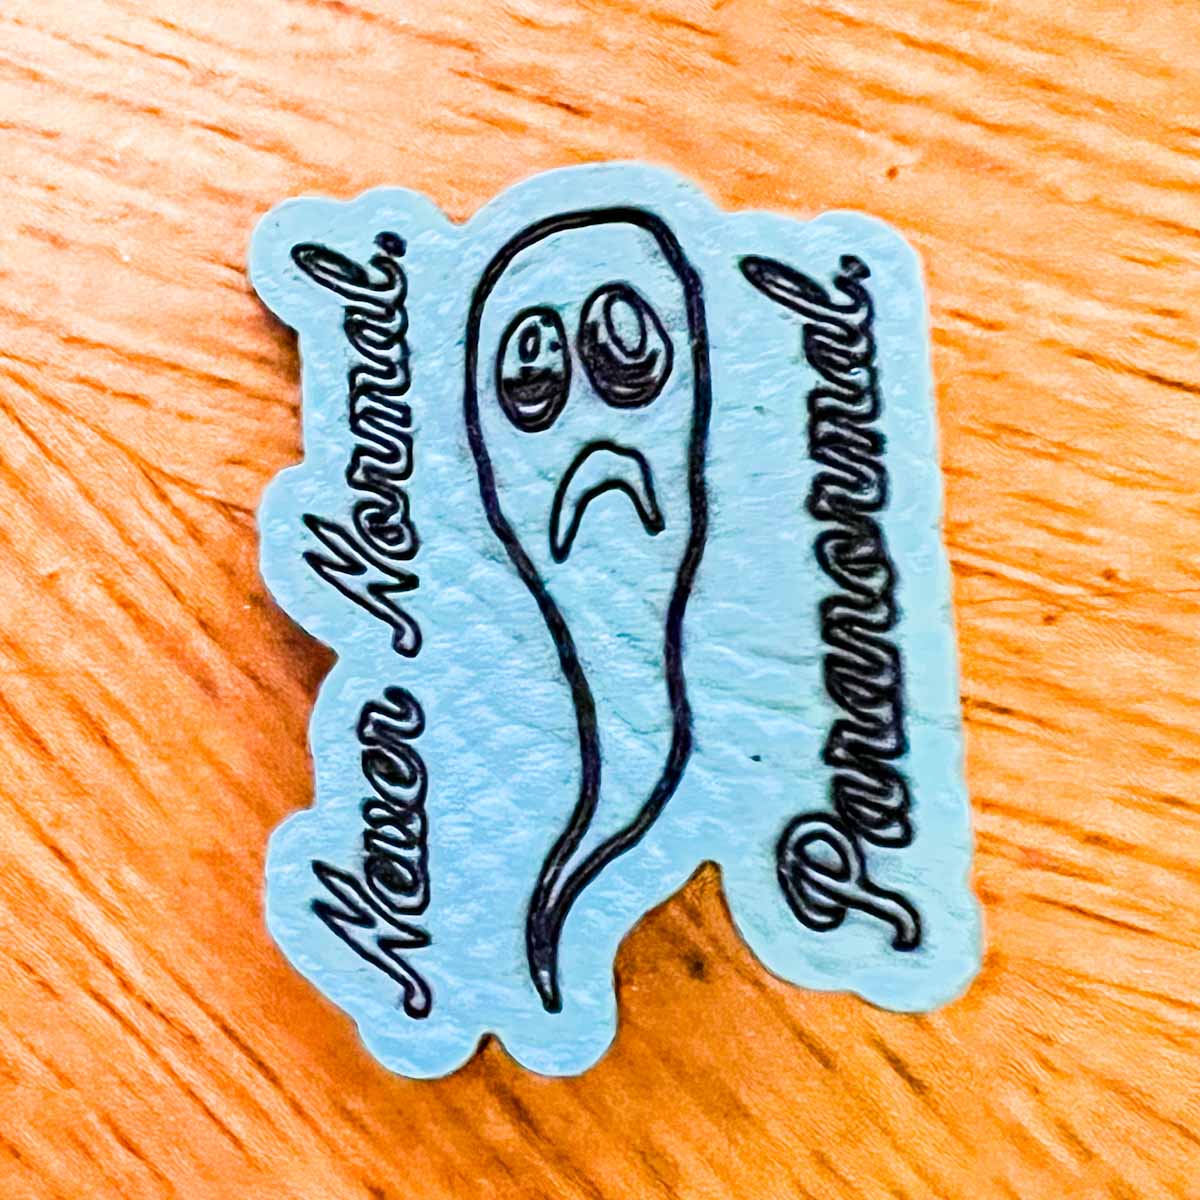 Never Normal Paranormal Ghost Pin; funny; Halloween; fashion accessory; ghost gift; pinback button; Melasdesign Handmade Darkness